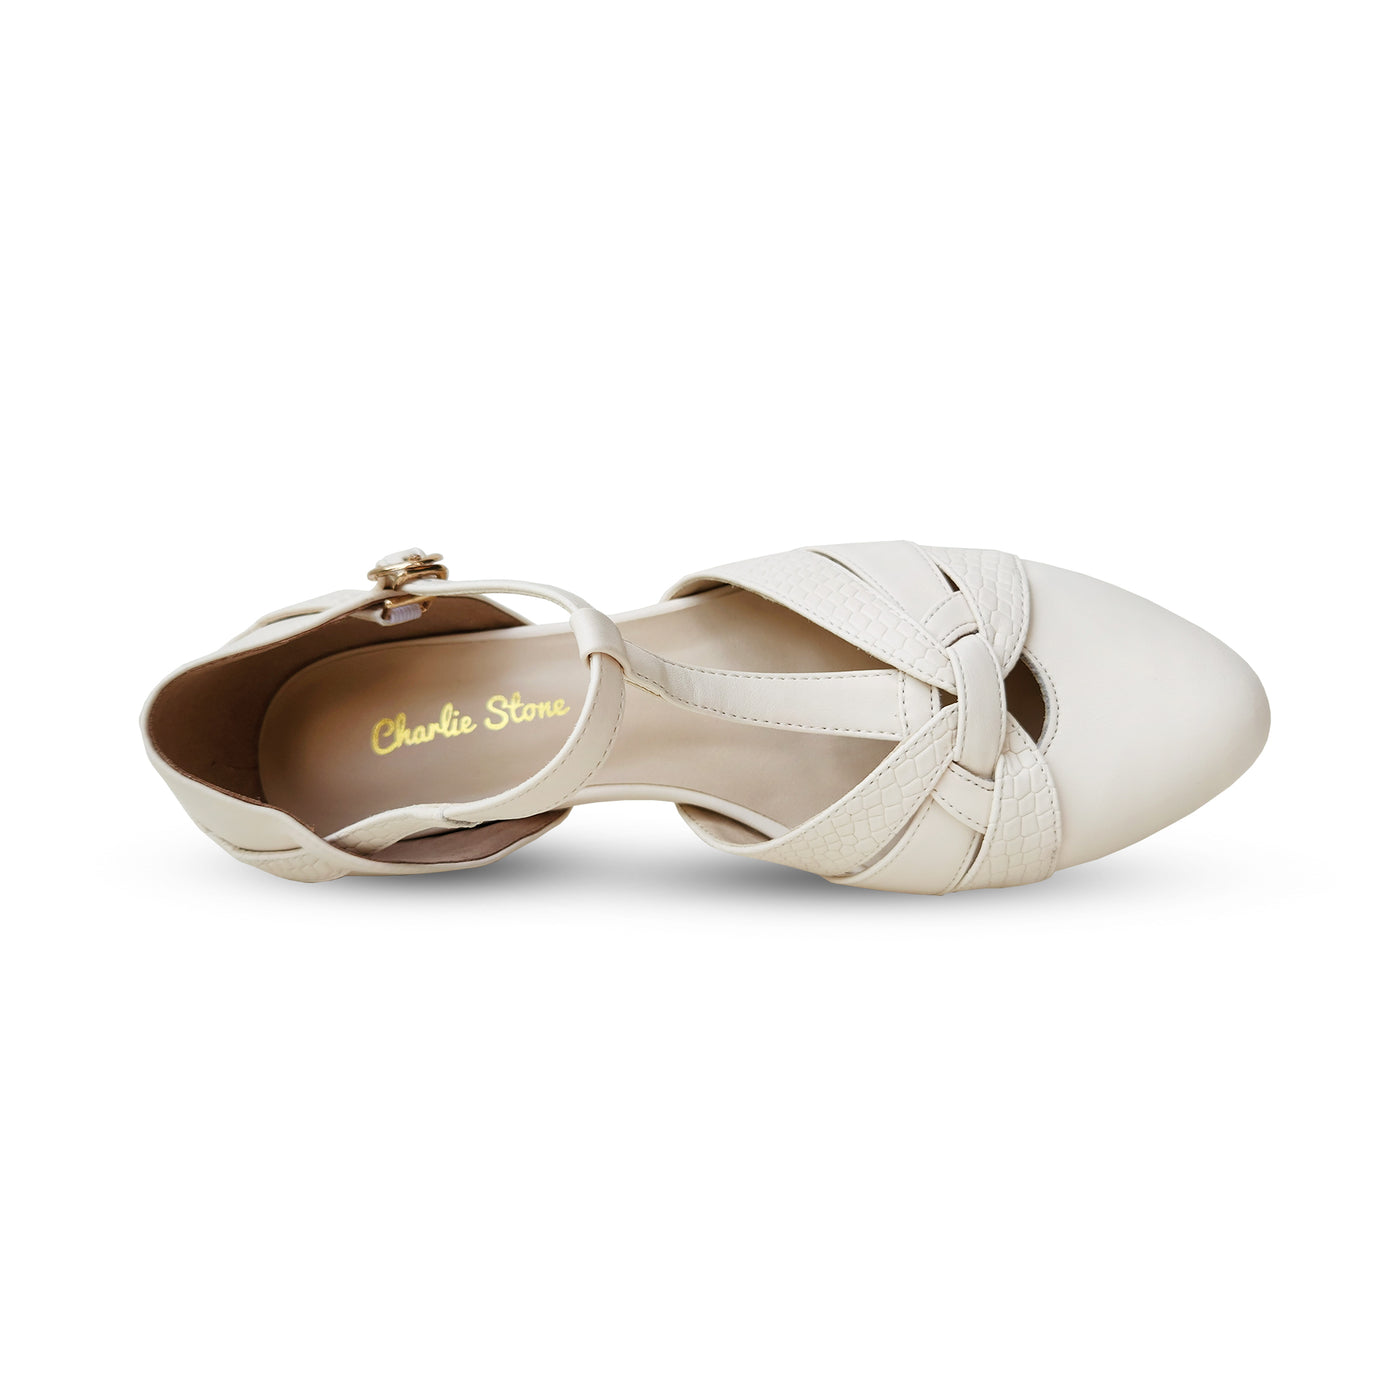 Charlie Stone Shoes vintage inspired ladies flat shoes made with GRS certified recycled materials vegan friendly light chantilly cream with T bar strap 1930's 1940's elegance